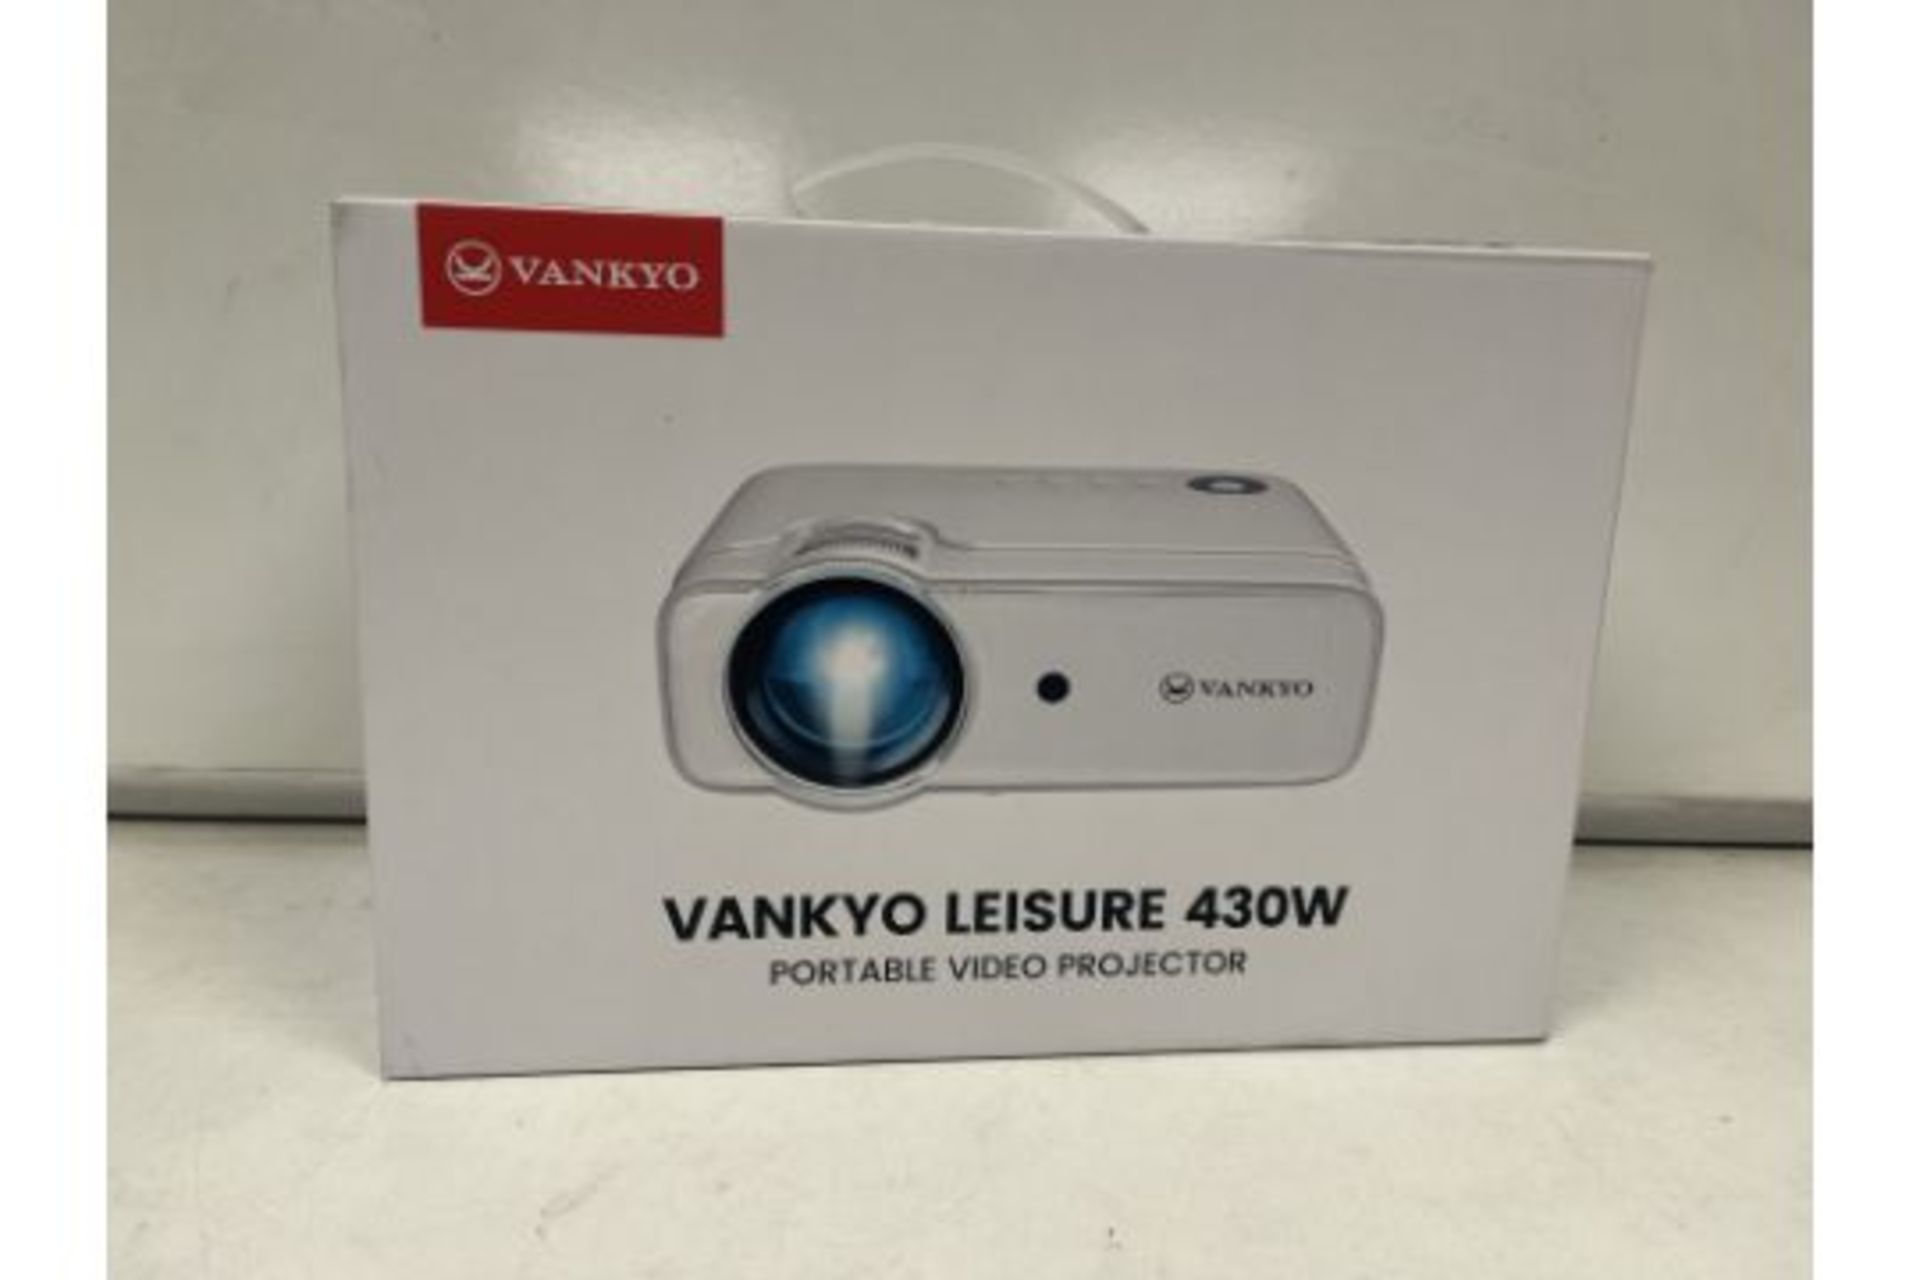 TRADE LOT 10 X New Boxed VANKYO Leisure 430 Mini Projector for Movie, Outdoor Entertainment,